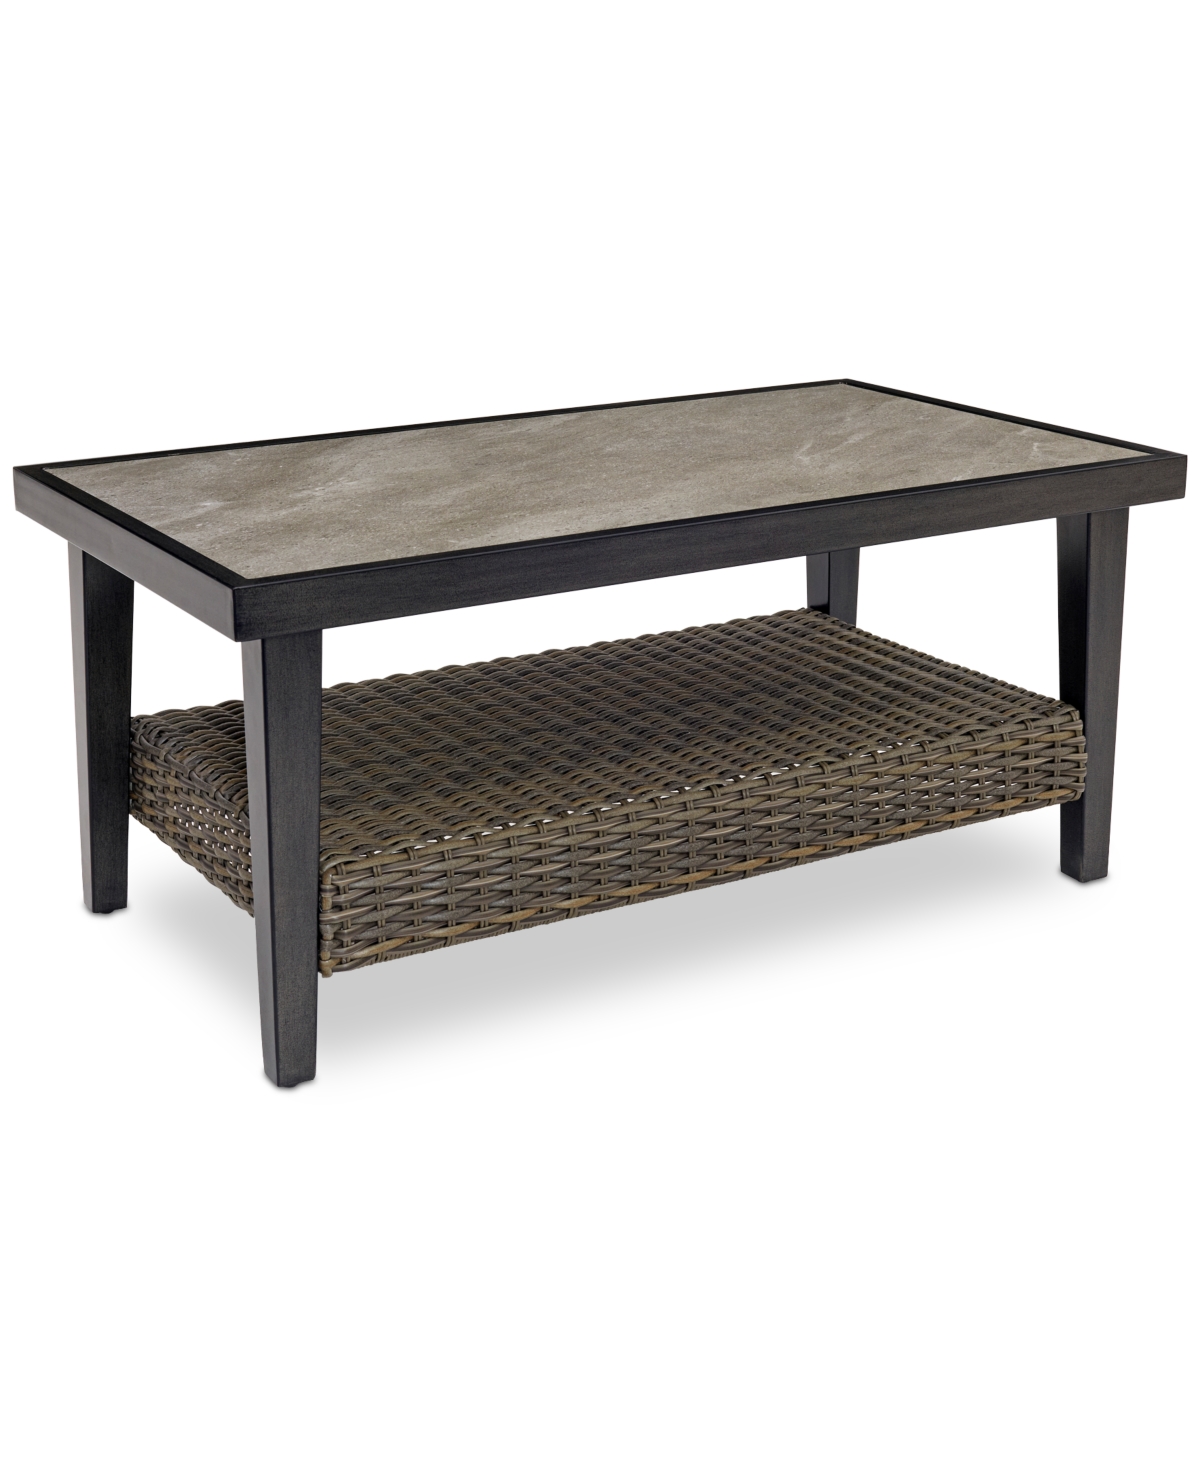 Agio Closeout! Belmont Outdoor 44"x25" Rectangle Tile Top Coffee Table In Gray